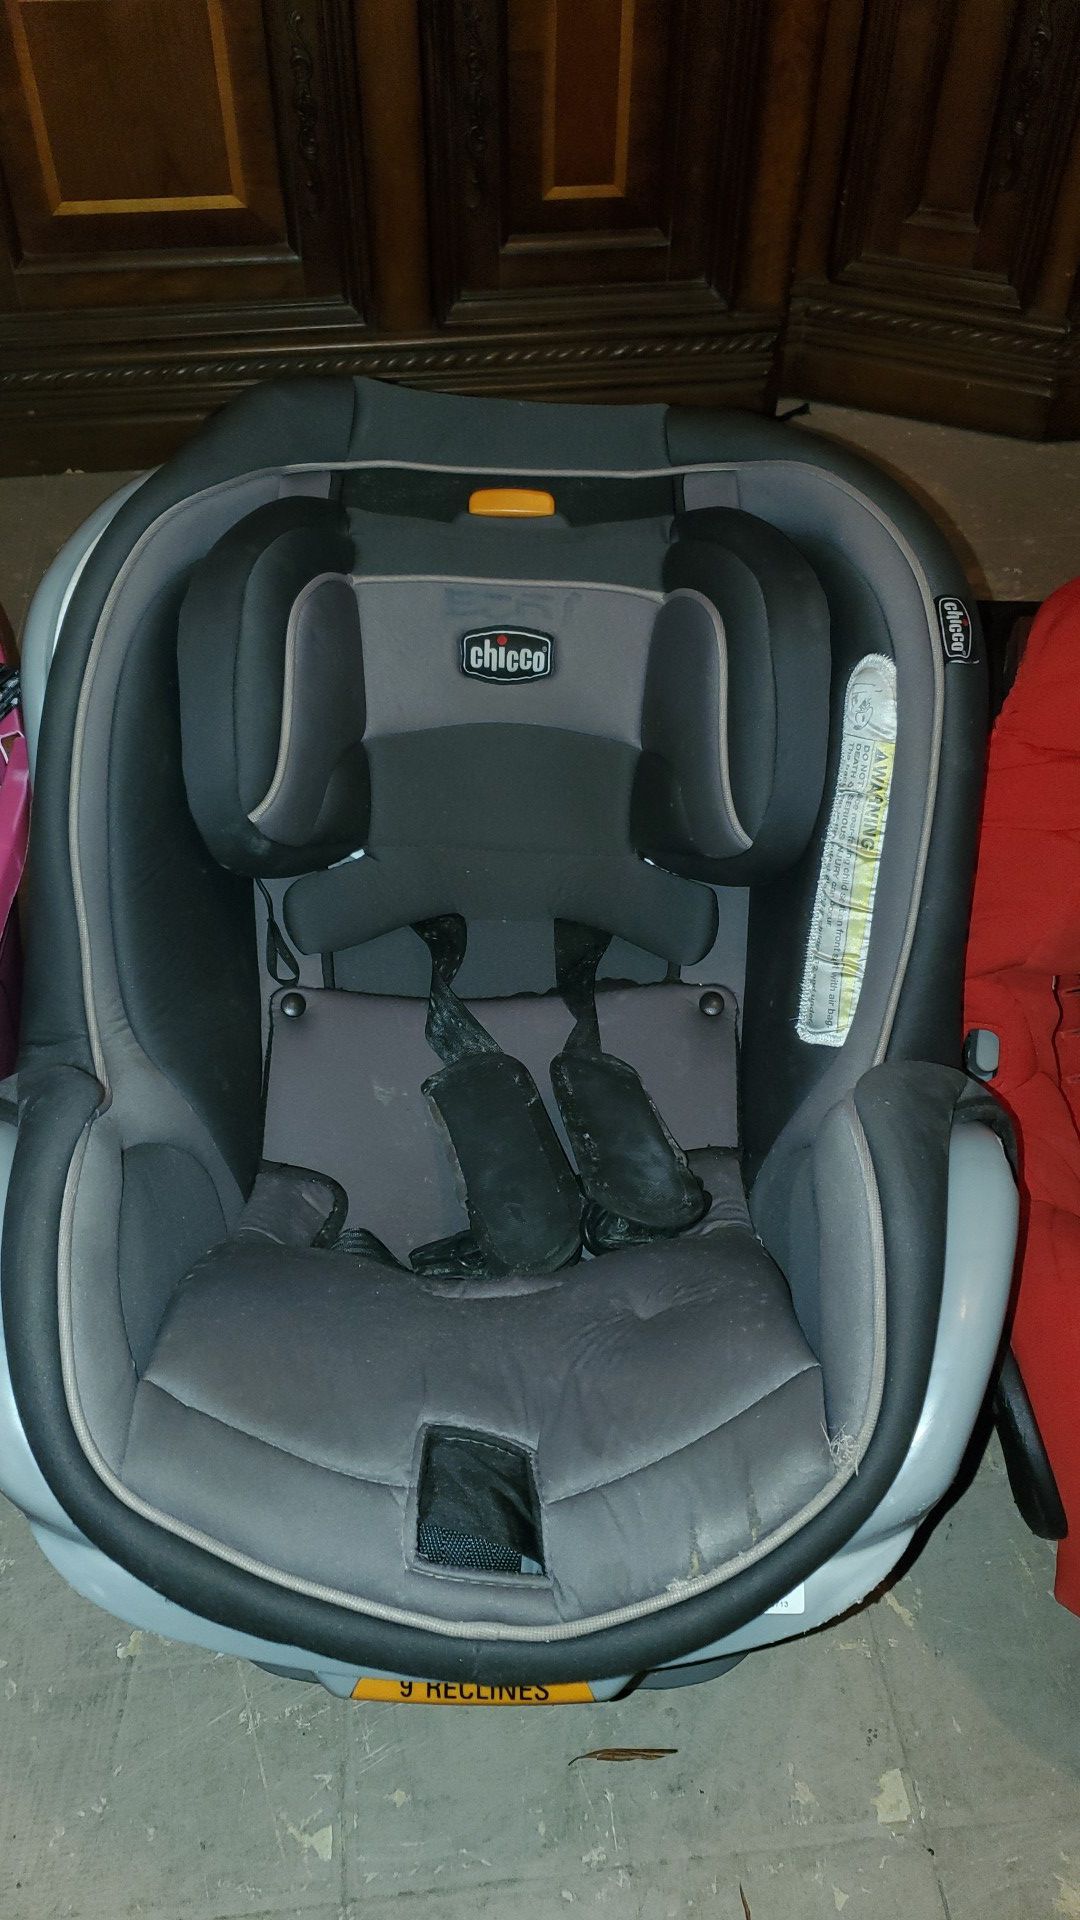 Chicco car seat 9 reclines